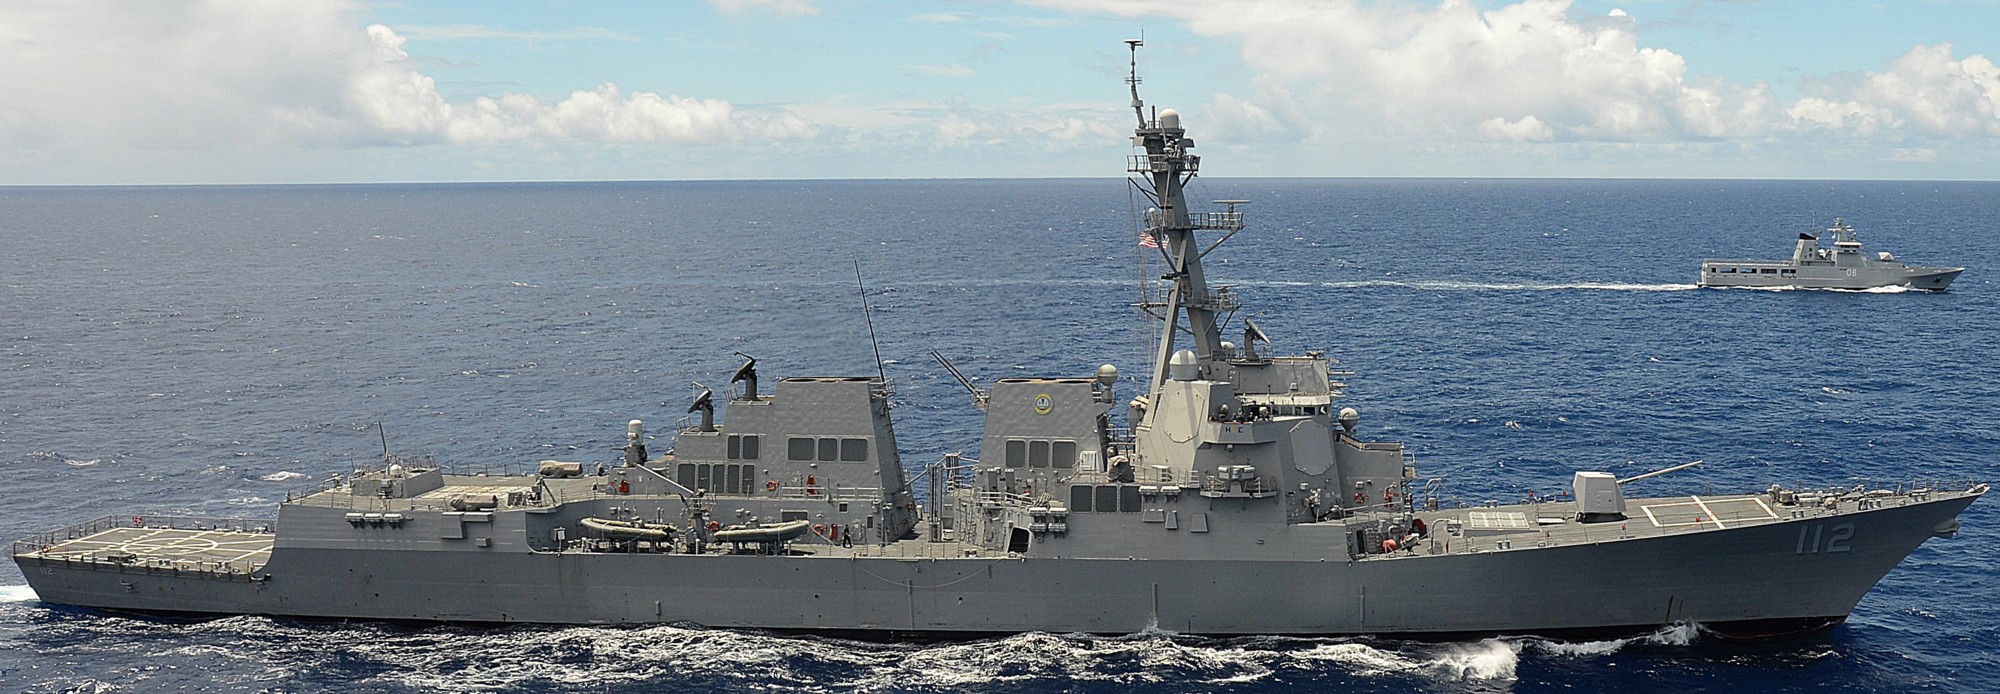 ddg-112 uss michael murphy arleigh burke class guided missile destroyer aegis us navy exercise rimpac 21